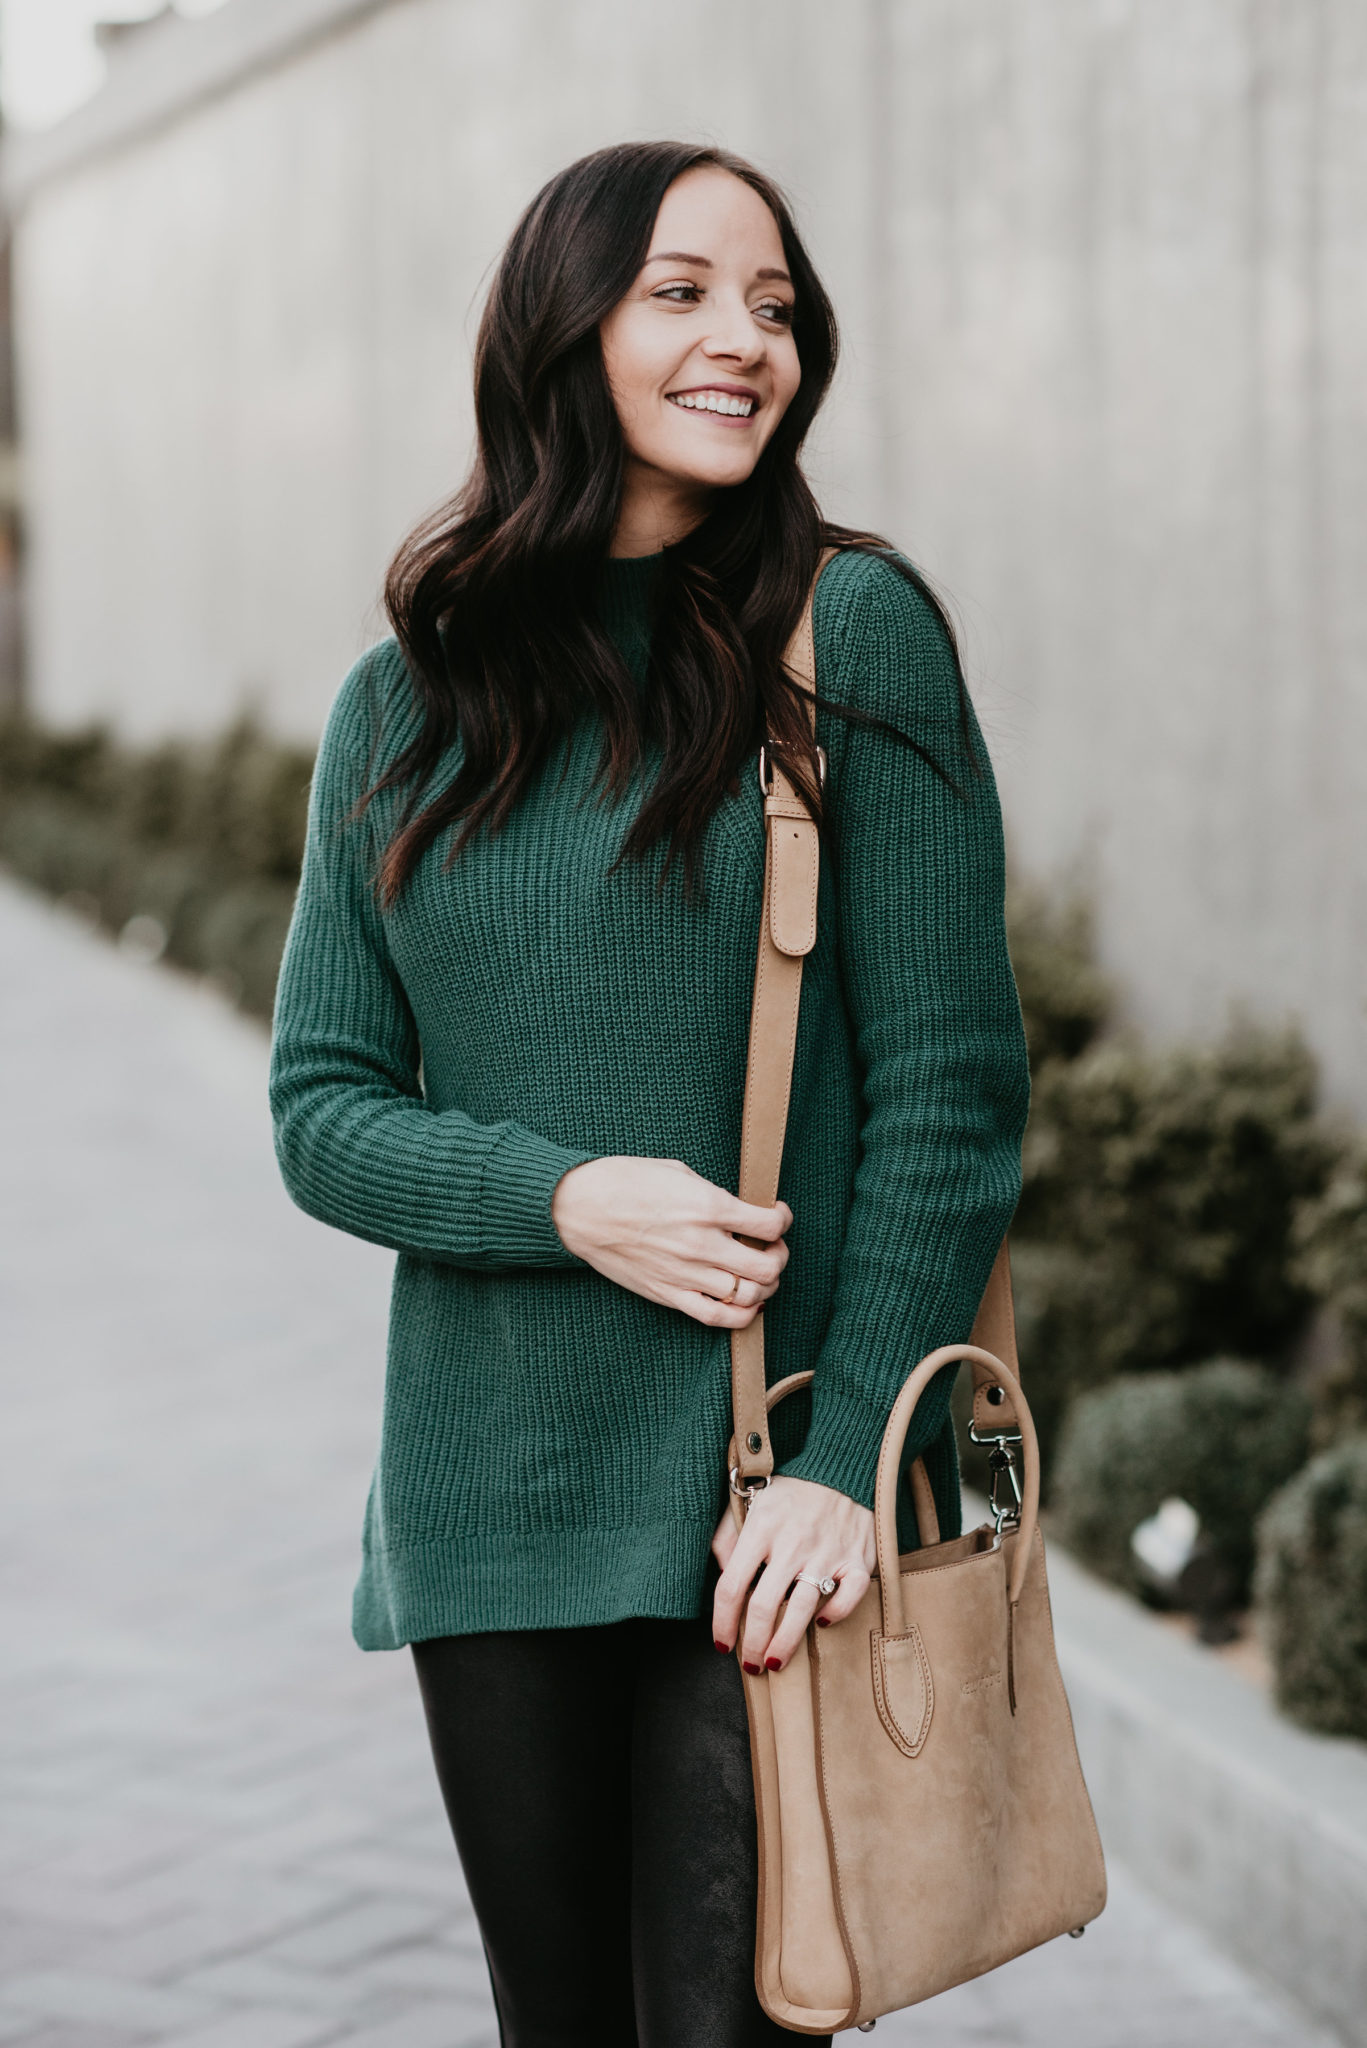 green tunic sweater with leggings winter outfit - My Favorite Winter Sweaters All Under $50 by popular Las Vegas style blogger Outfits & Outings